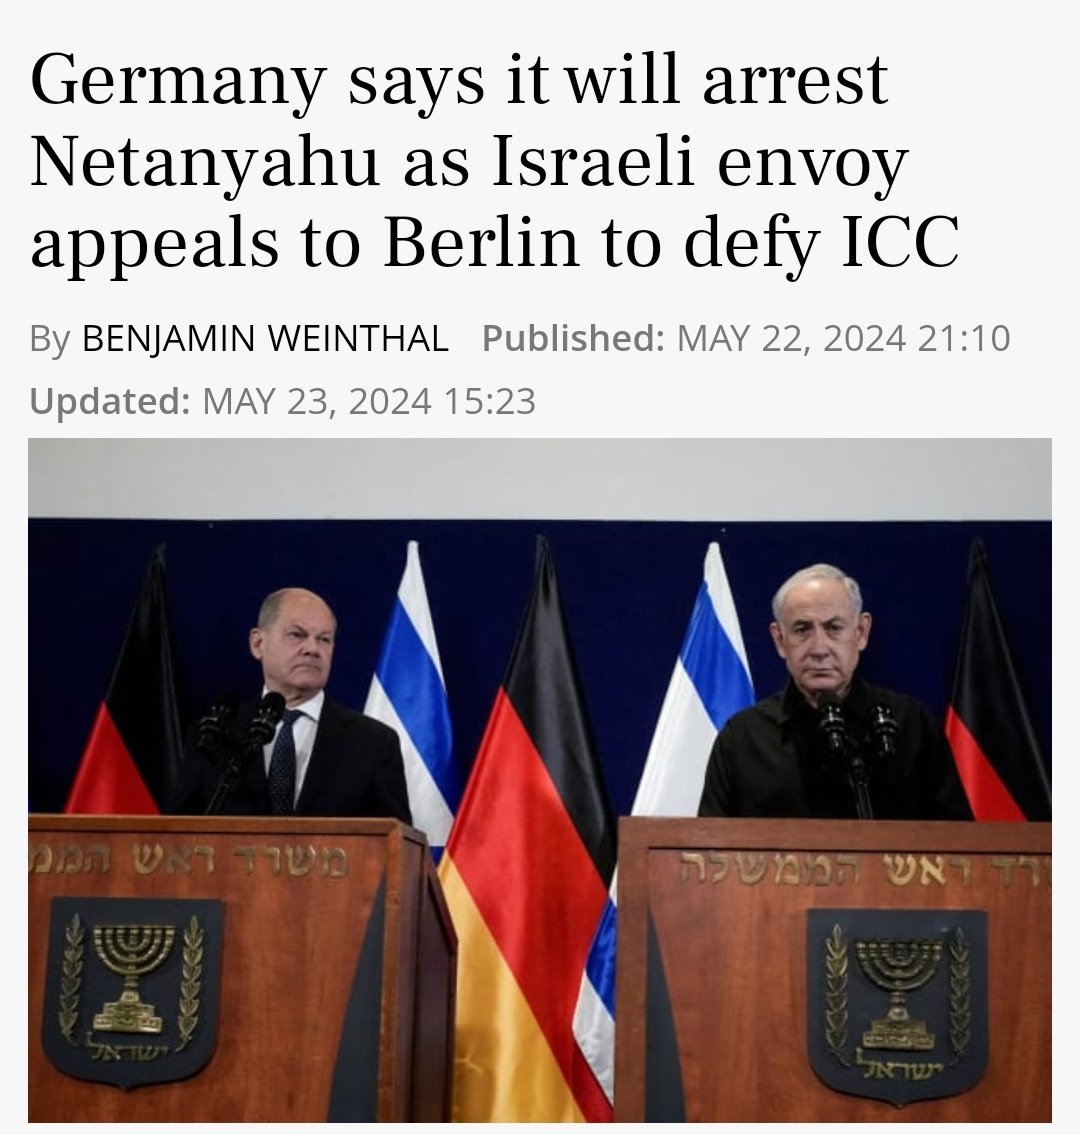 Germany 🇩🇪 arresting Jews again? I did NOT SEE that coming... _